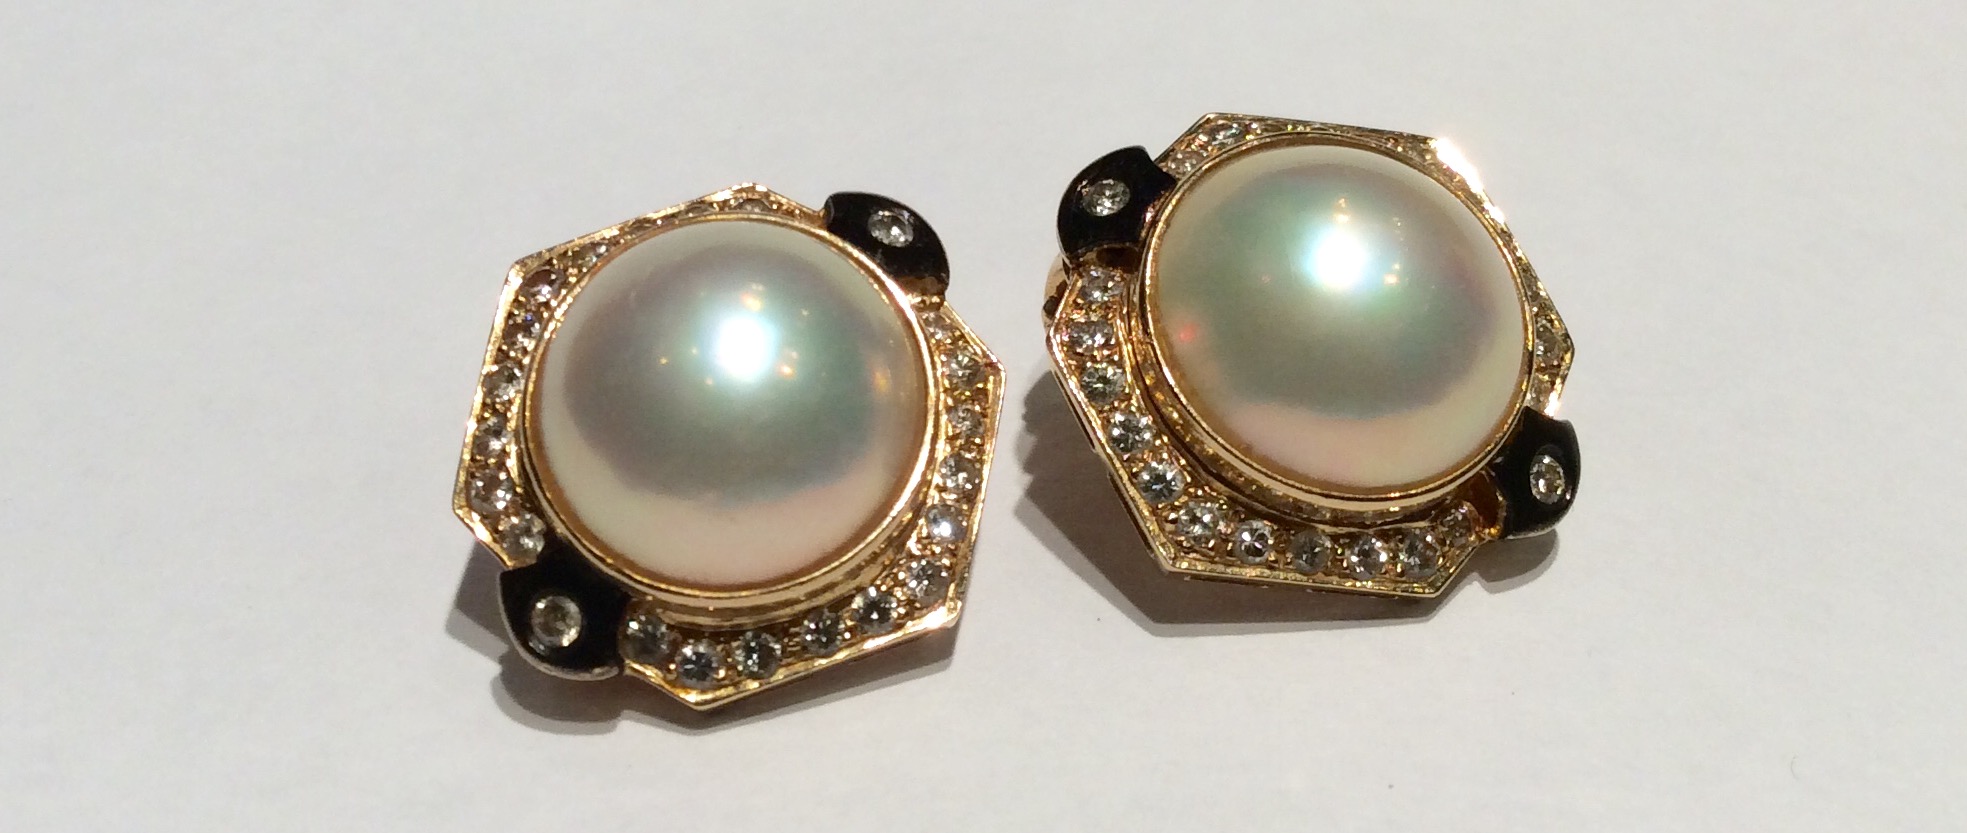 A PAIR OF 18CT GOLD, MABÉ PEARL AND DIAMOND CLIP-ON EARRINGS Each earring designed with a central